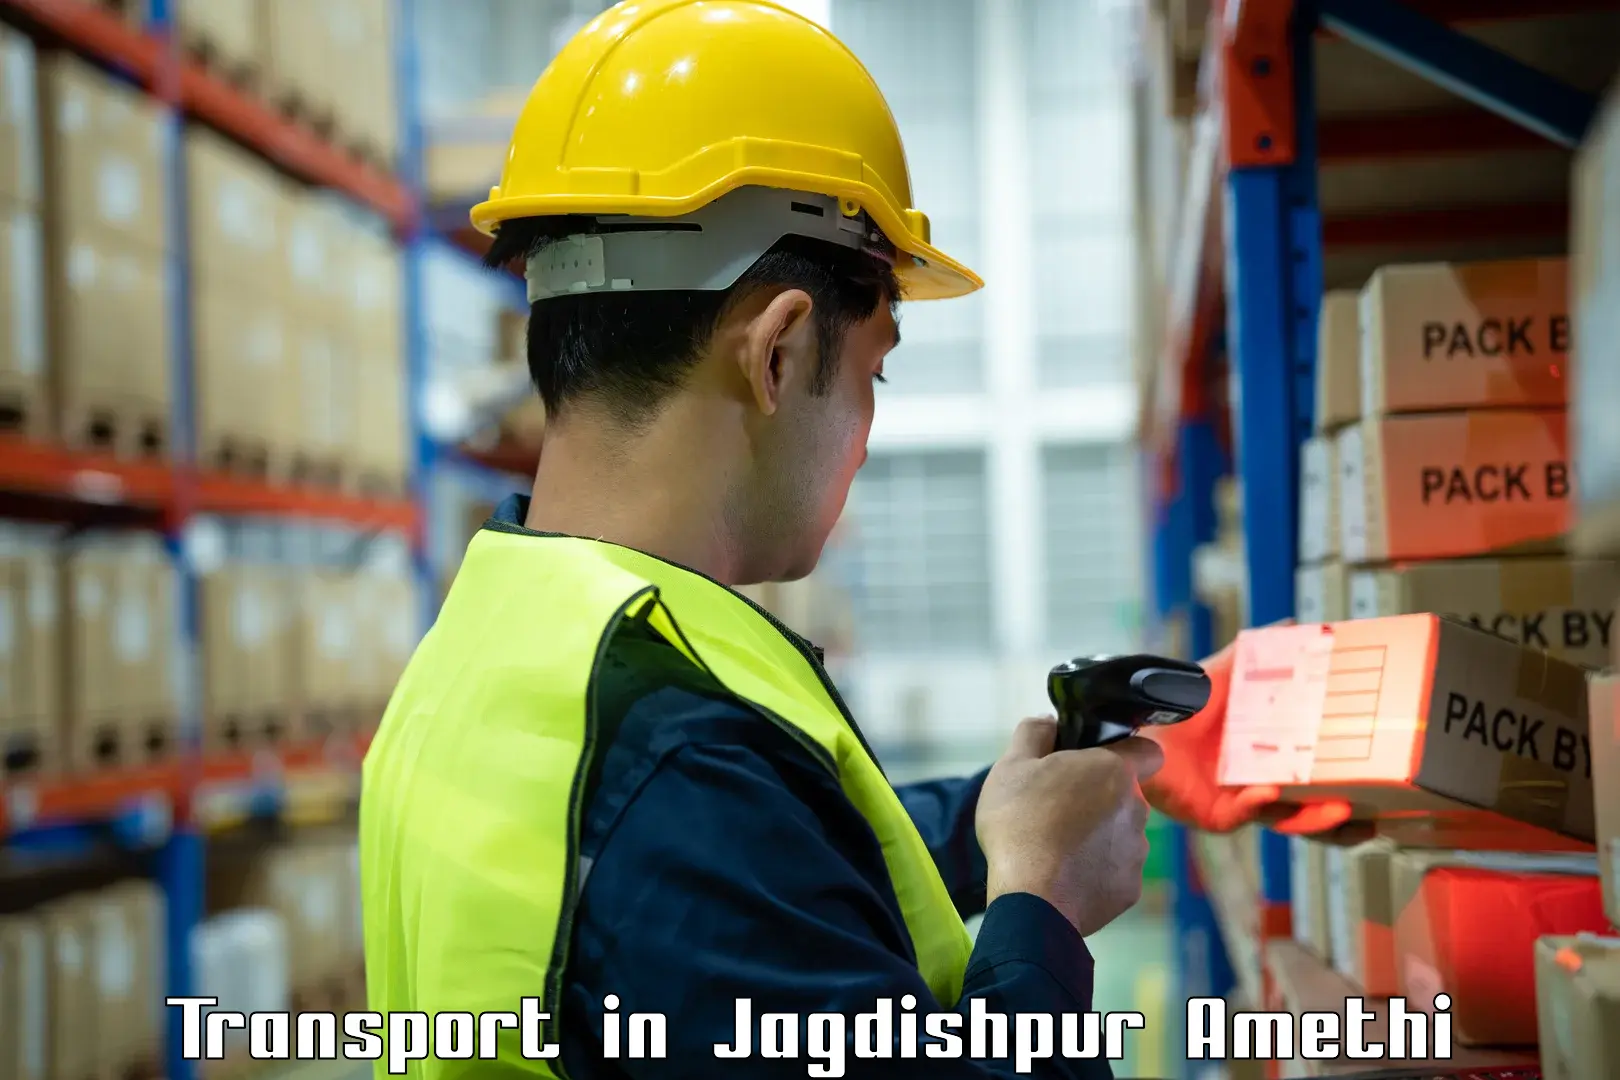 Shipping services in Jagdishpur Amethi